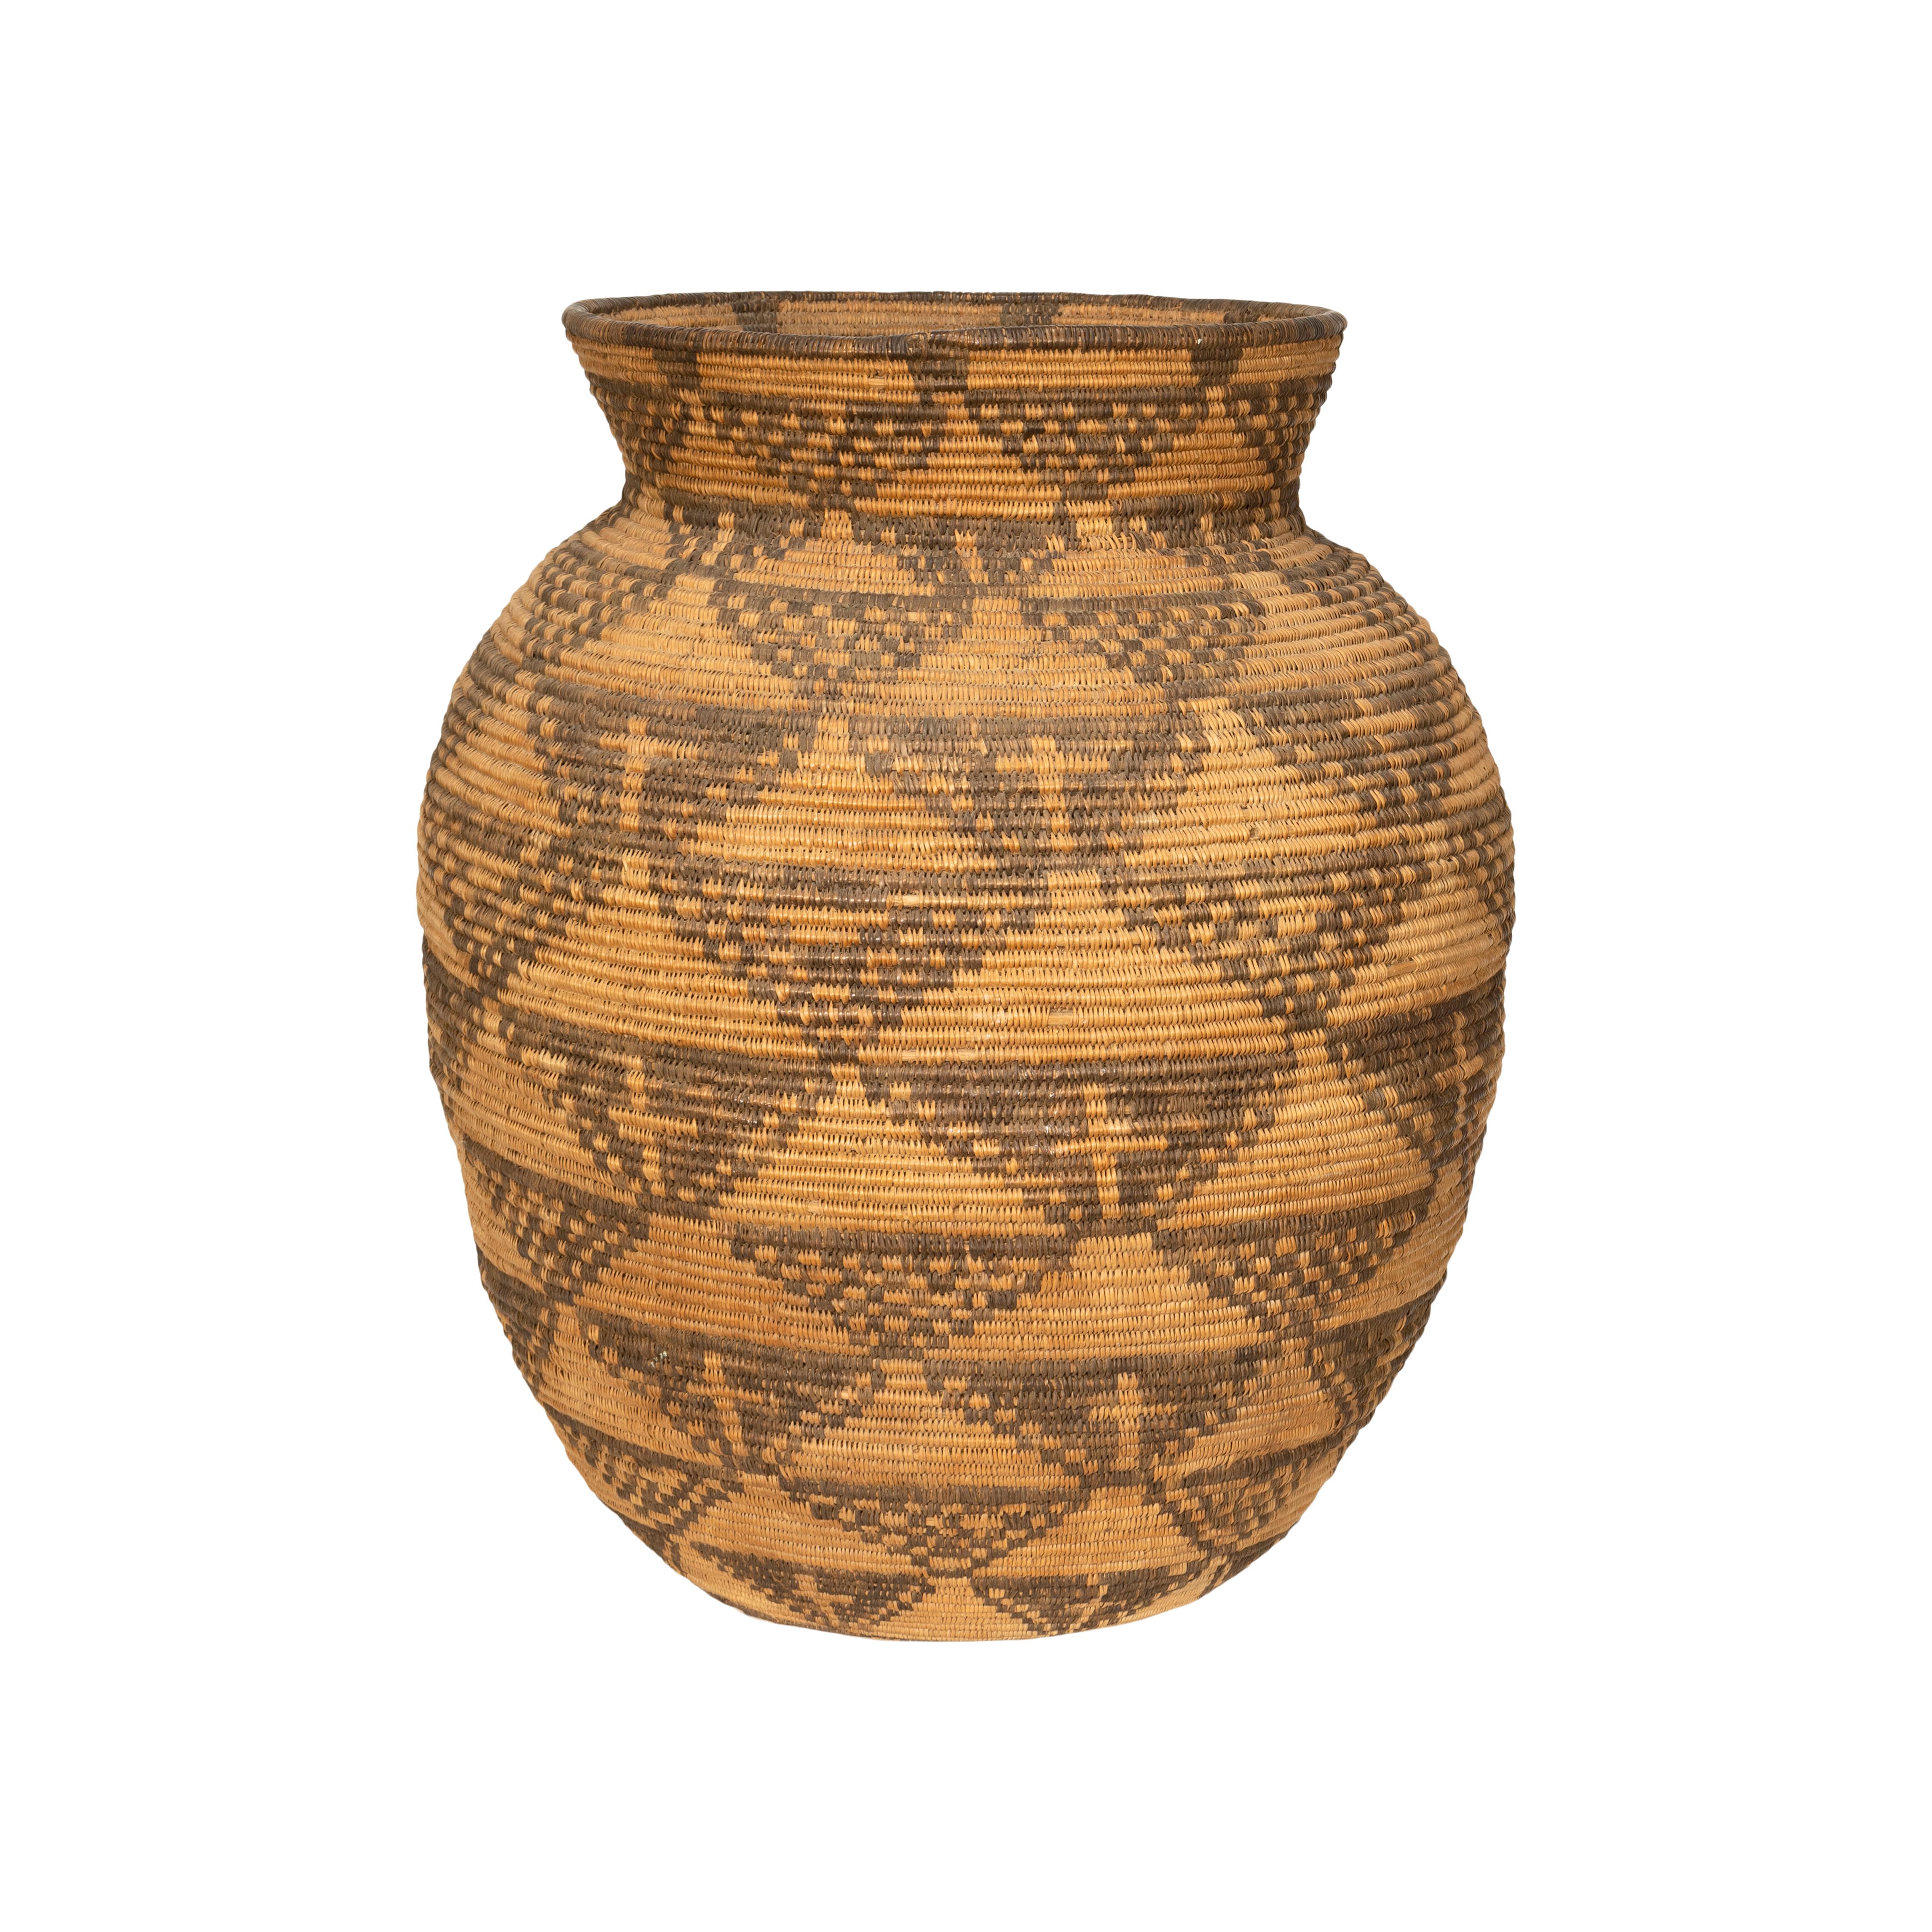 Figurative Apache olla with crosses made inside, vertical triangles that connect in a geometric web. After an olla was filled to the brim with wild grass seeds such as chia or amaranth, or domestic plant products like corn or beans, a basketry lid